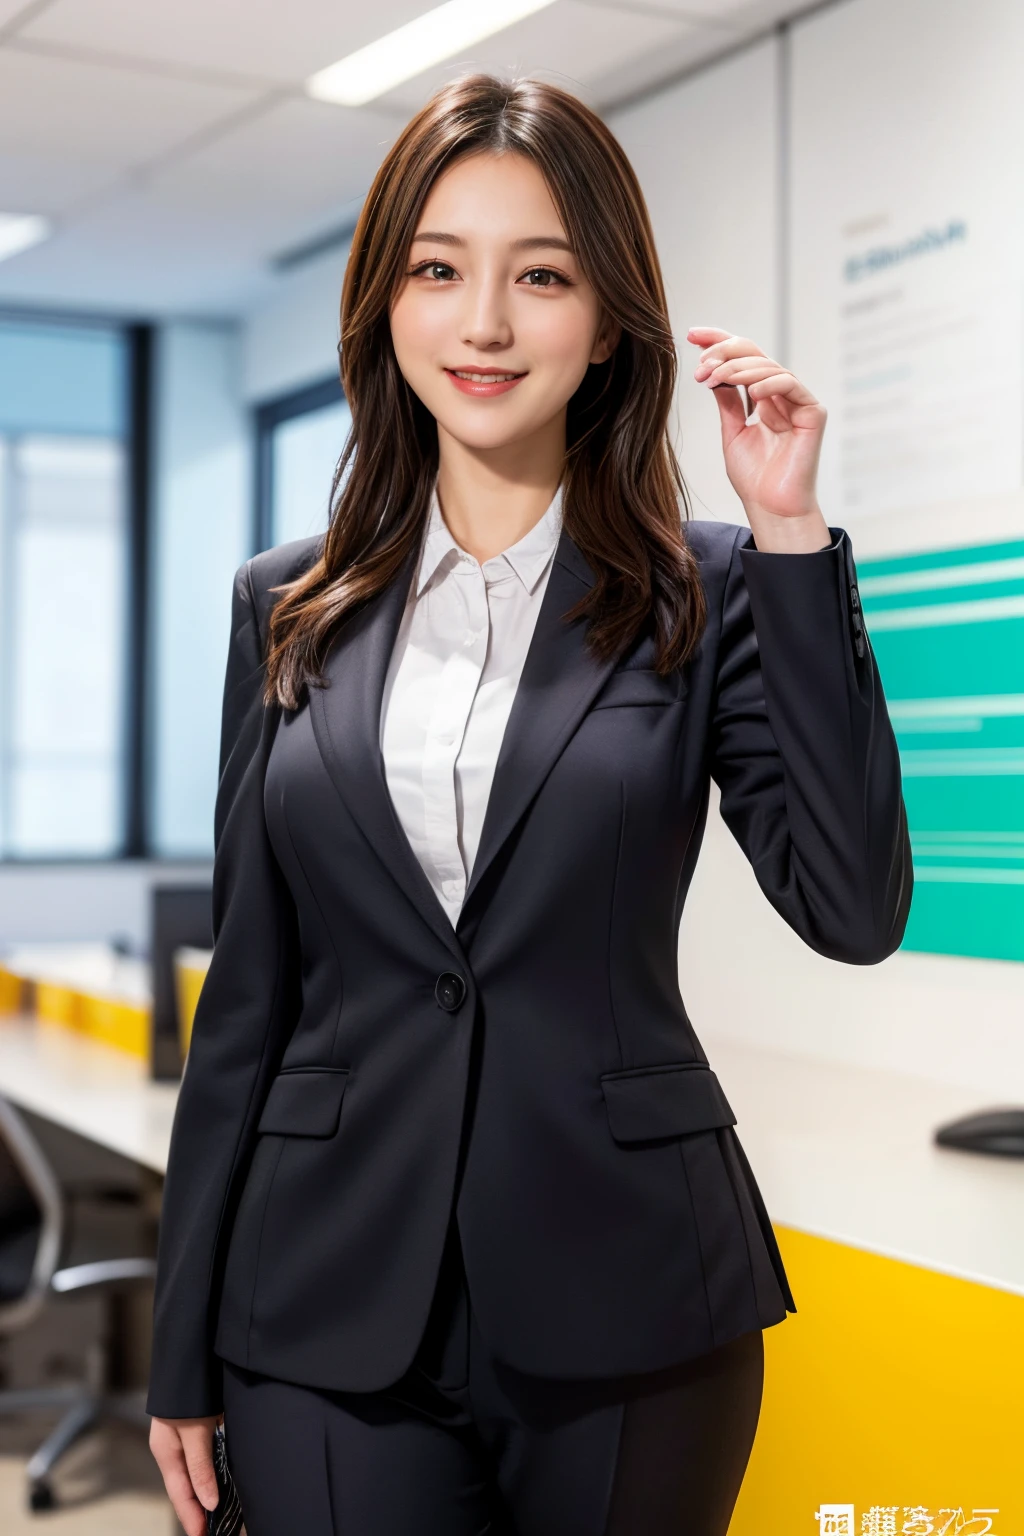 masutepiece, Best Quality, Illustration, Ultra-detailed, finely detail, hight resolution, 8K Wallpaper, Wearing a suit,Dynamic composition, Beautiful detailed eyes,  new employee、 Natural Color Lip, Random and sexy poses,Smile,s Office、Looking at the camera、A 23-year-old girl、